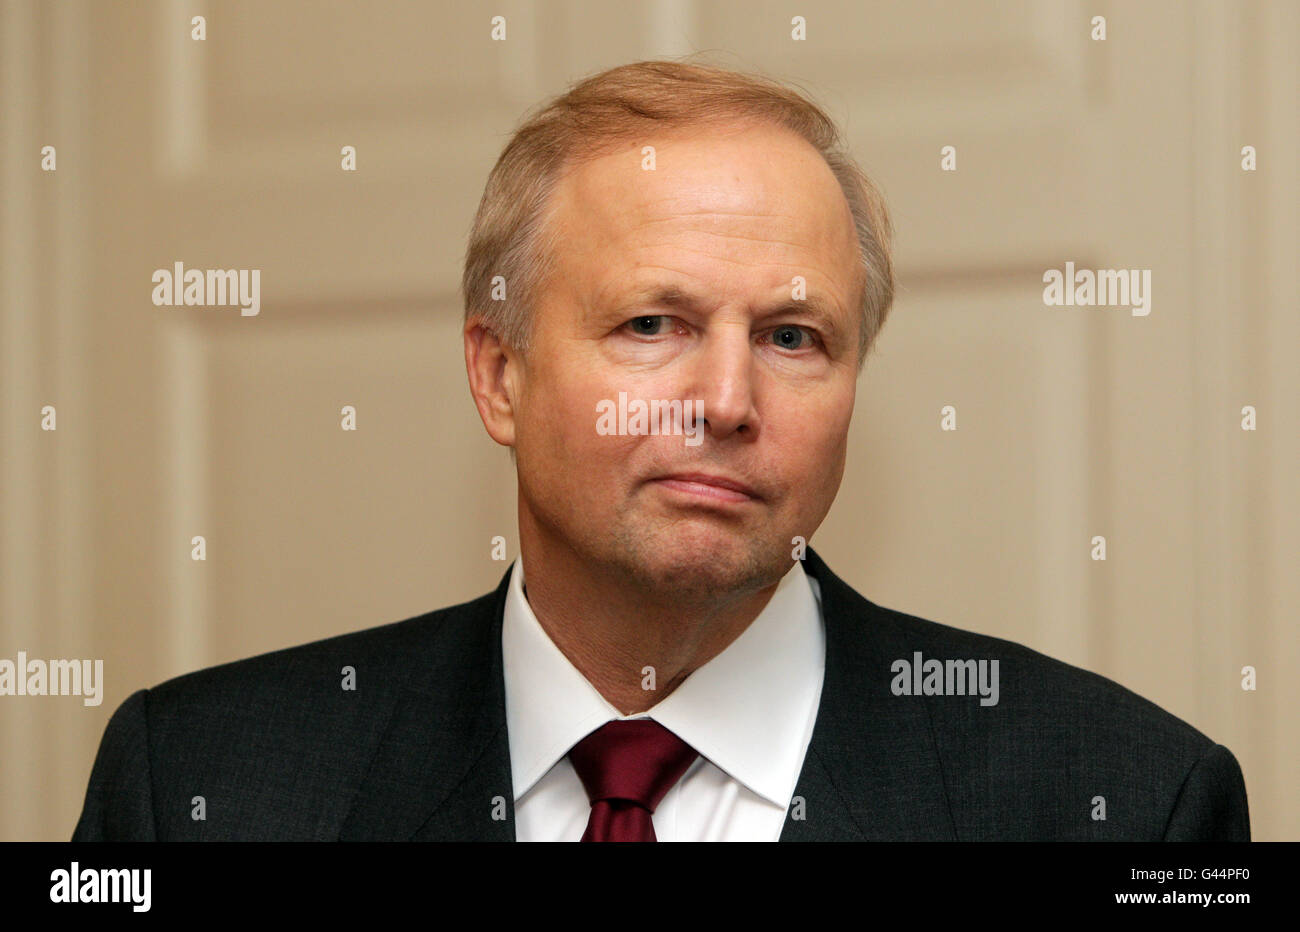 BP in deal with major Indian firm. Robert Dudley, CEO of BP, during a signing ceremony at 11 Downing Street. Stock Photo